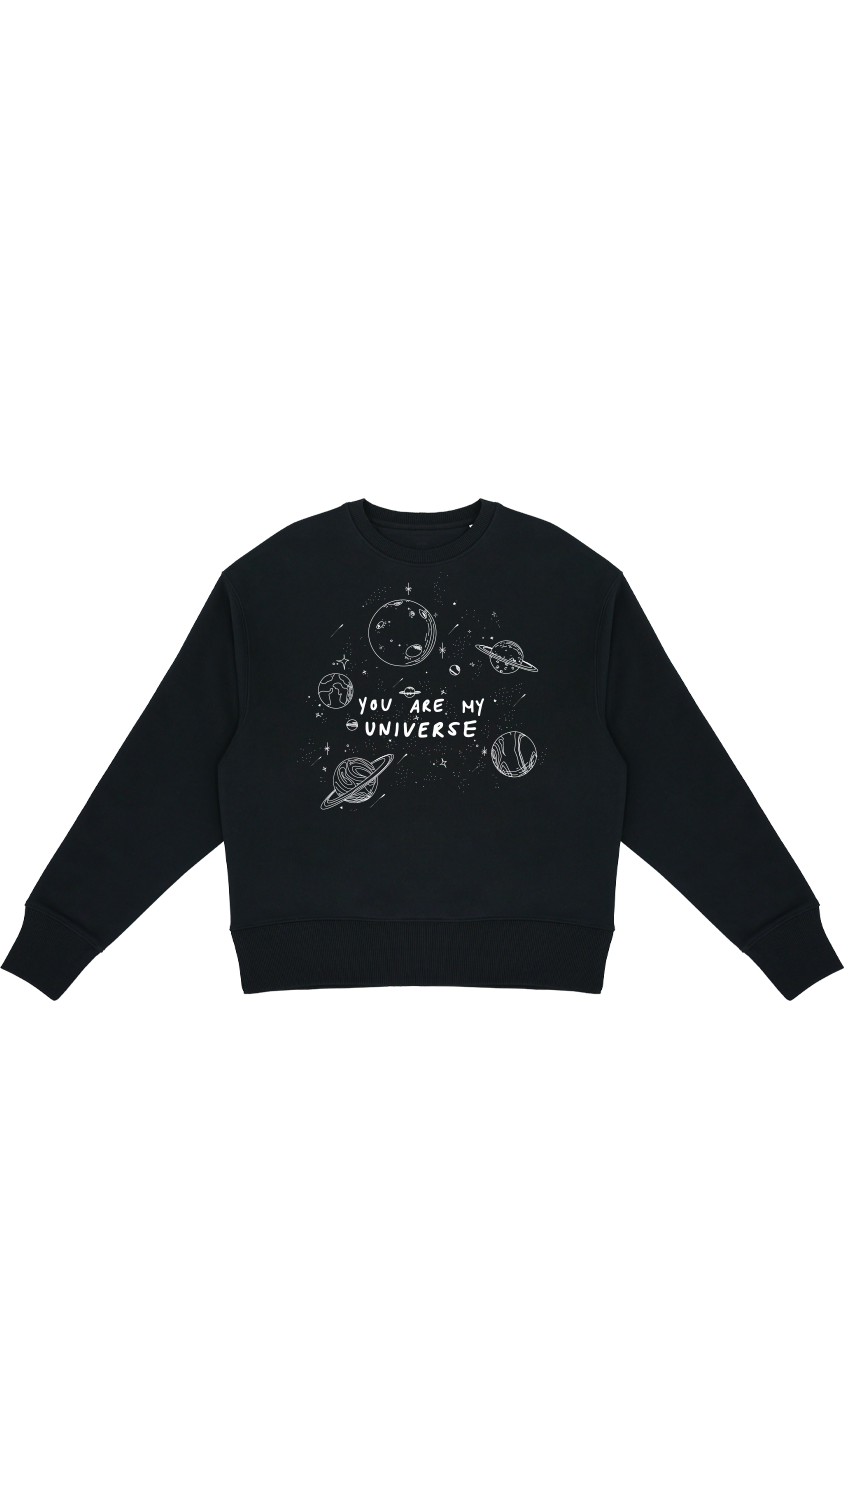 You are my universe Sweater